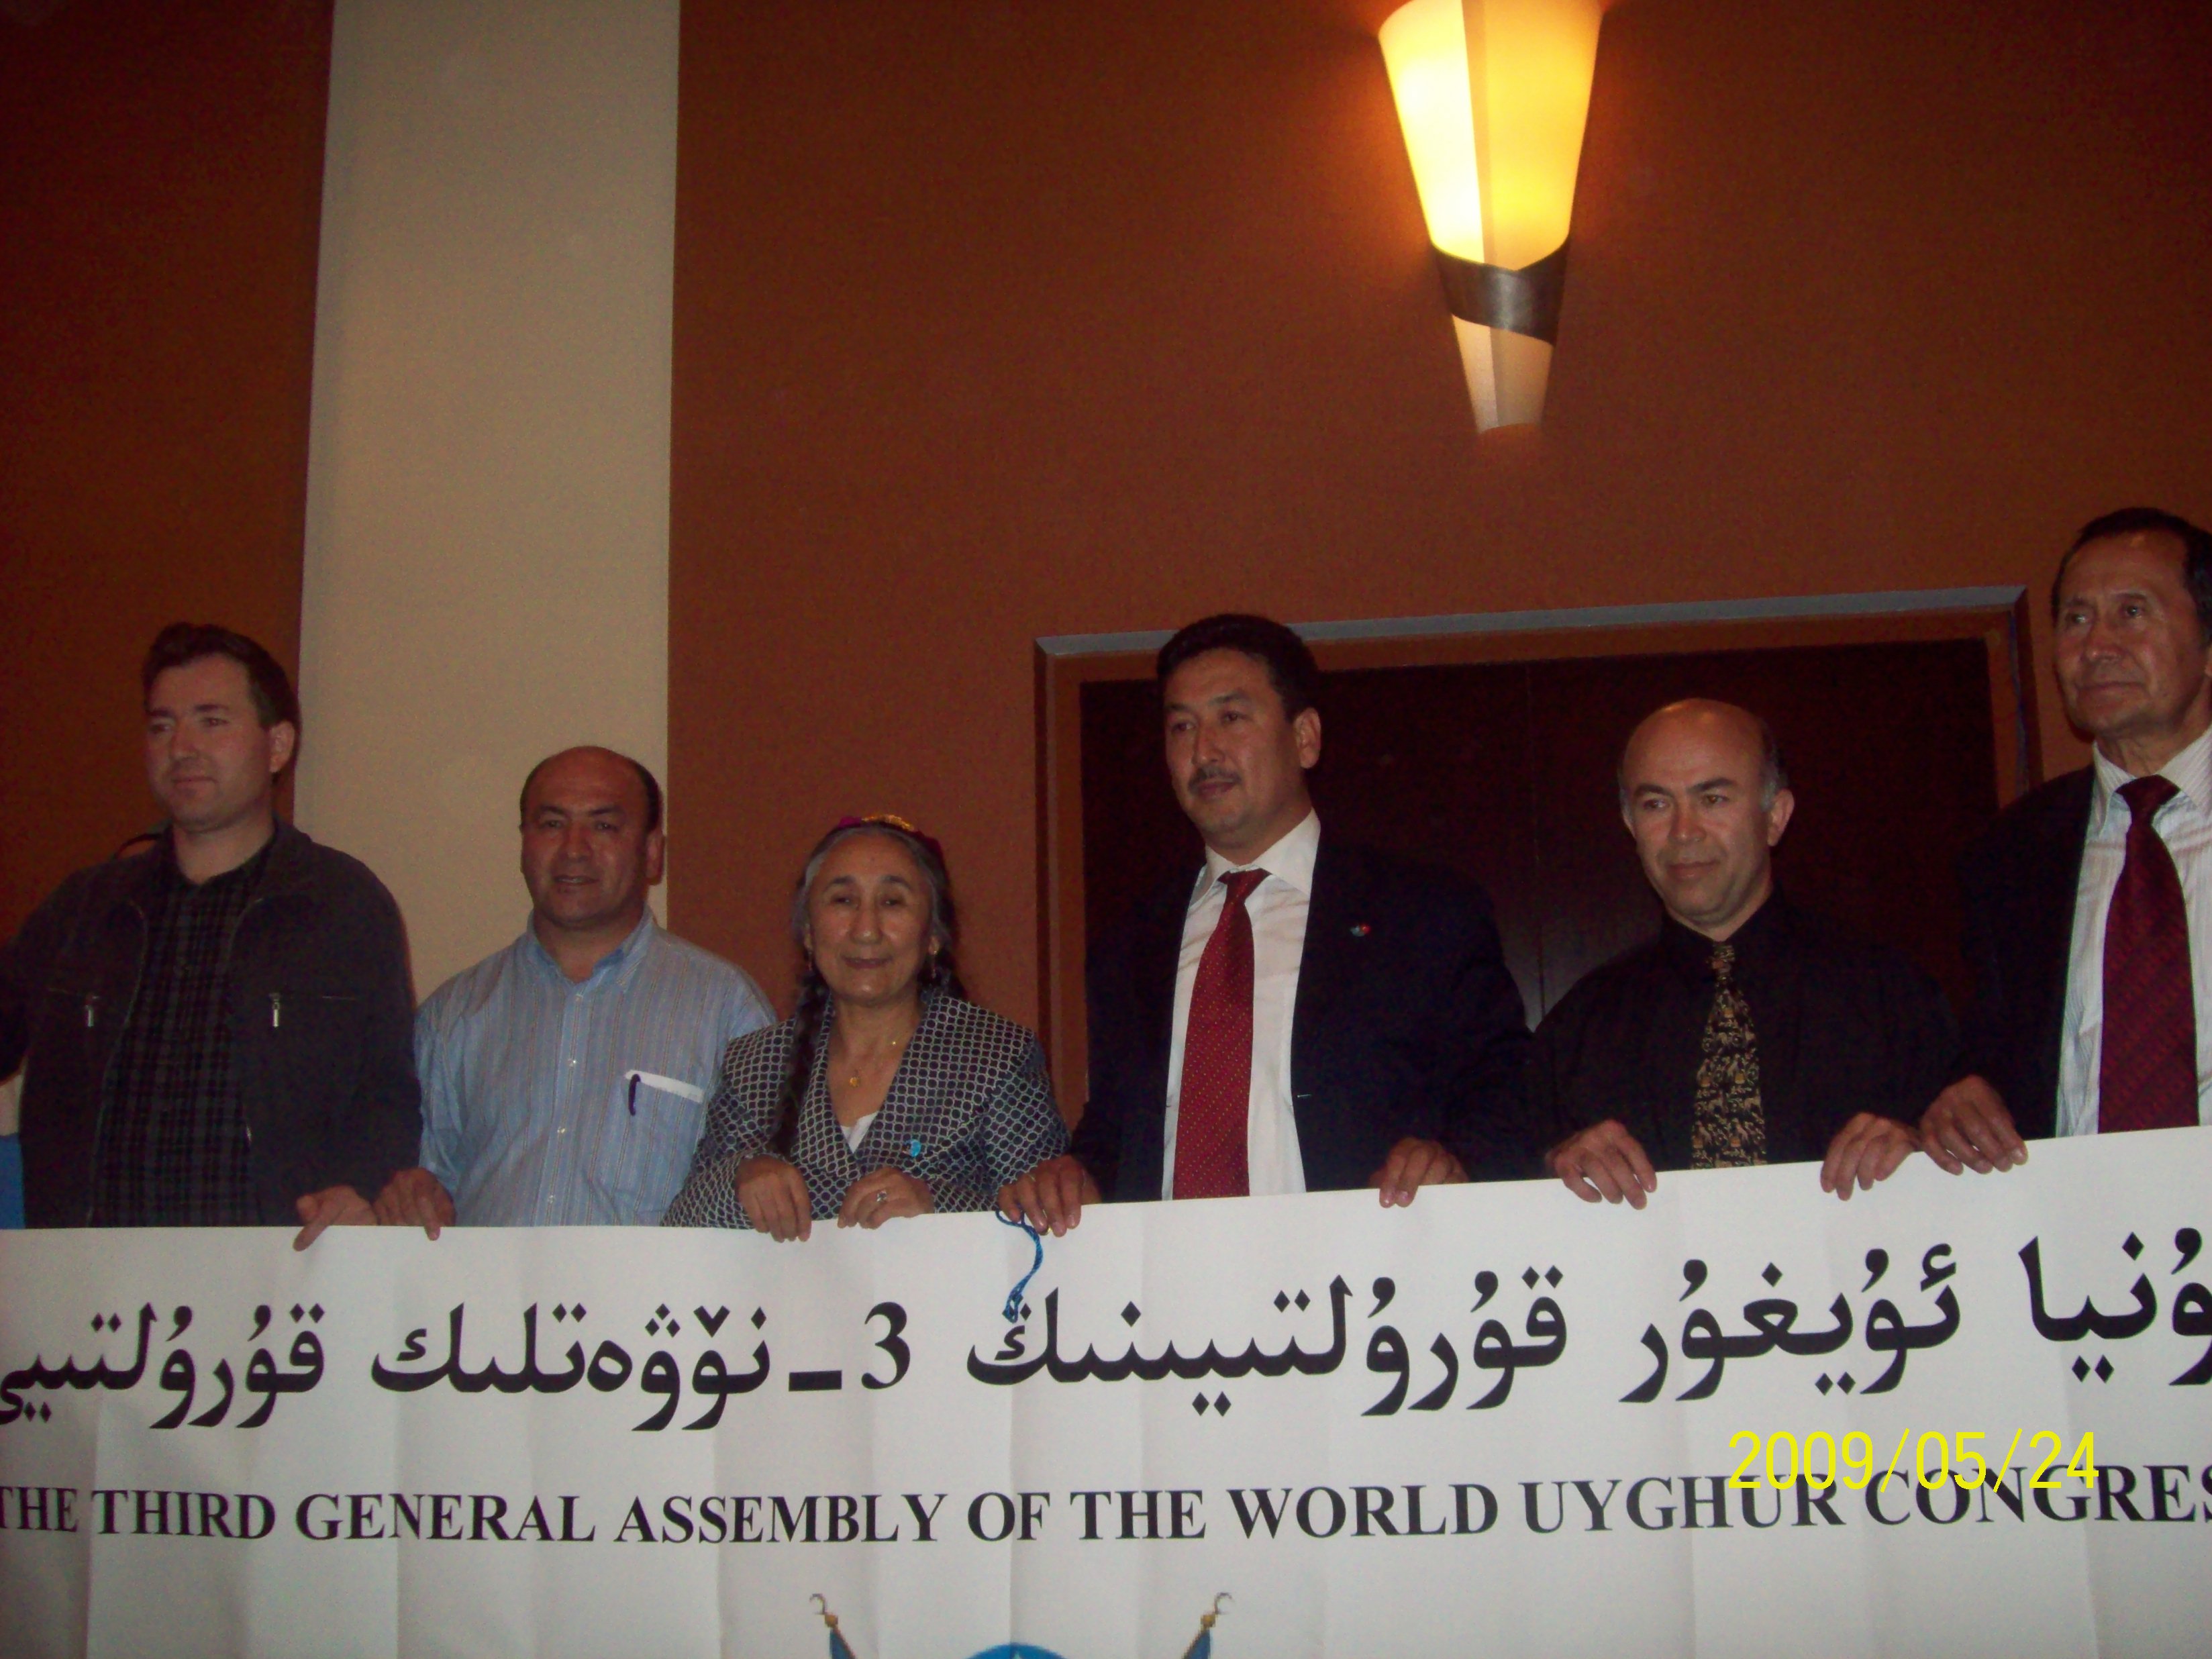 The WUC Leadership during the Third General Assembly (May 2009-April 2012)